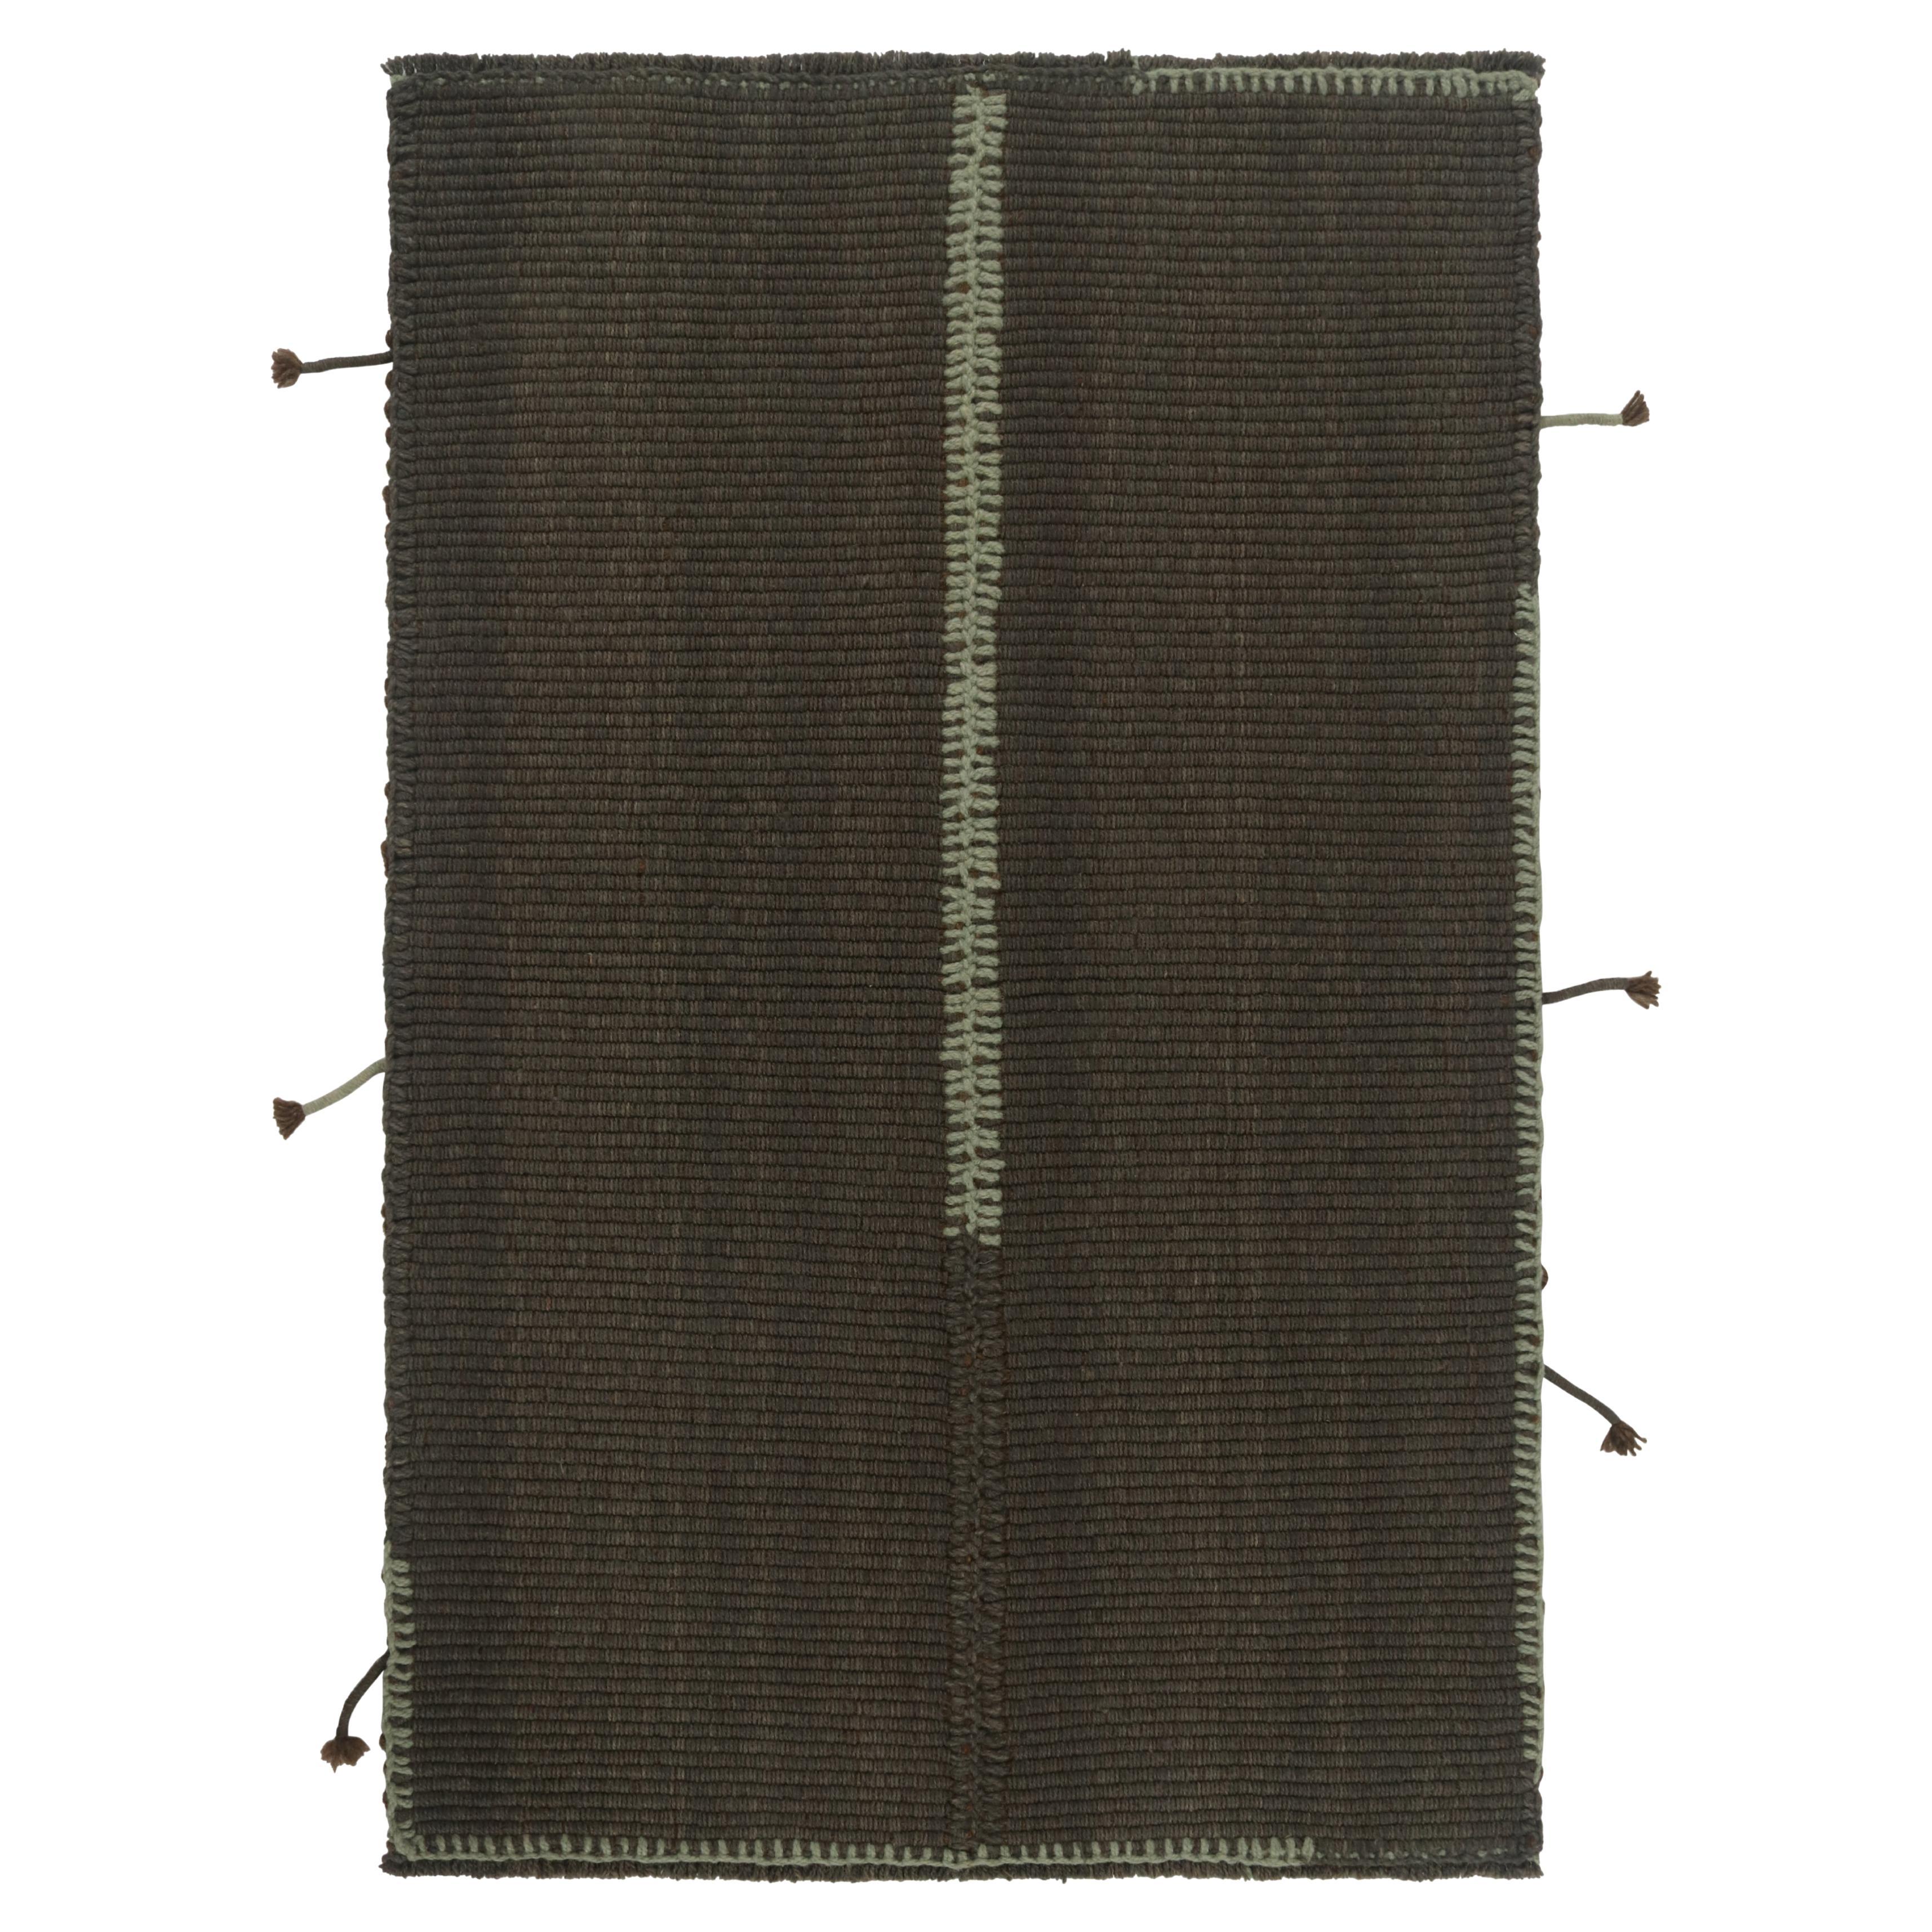 Rug & Kilim’s Contemporary Kilim in Gray with Brown and Light Blue Accents For Sale